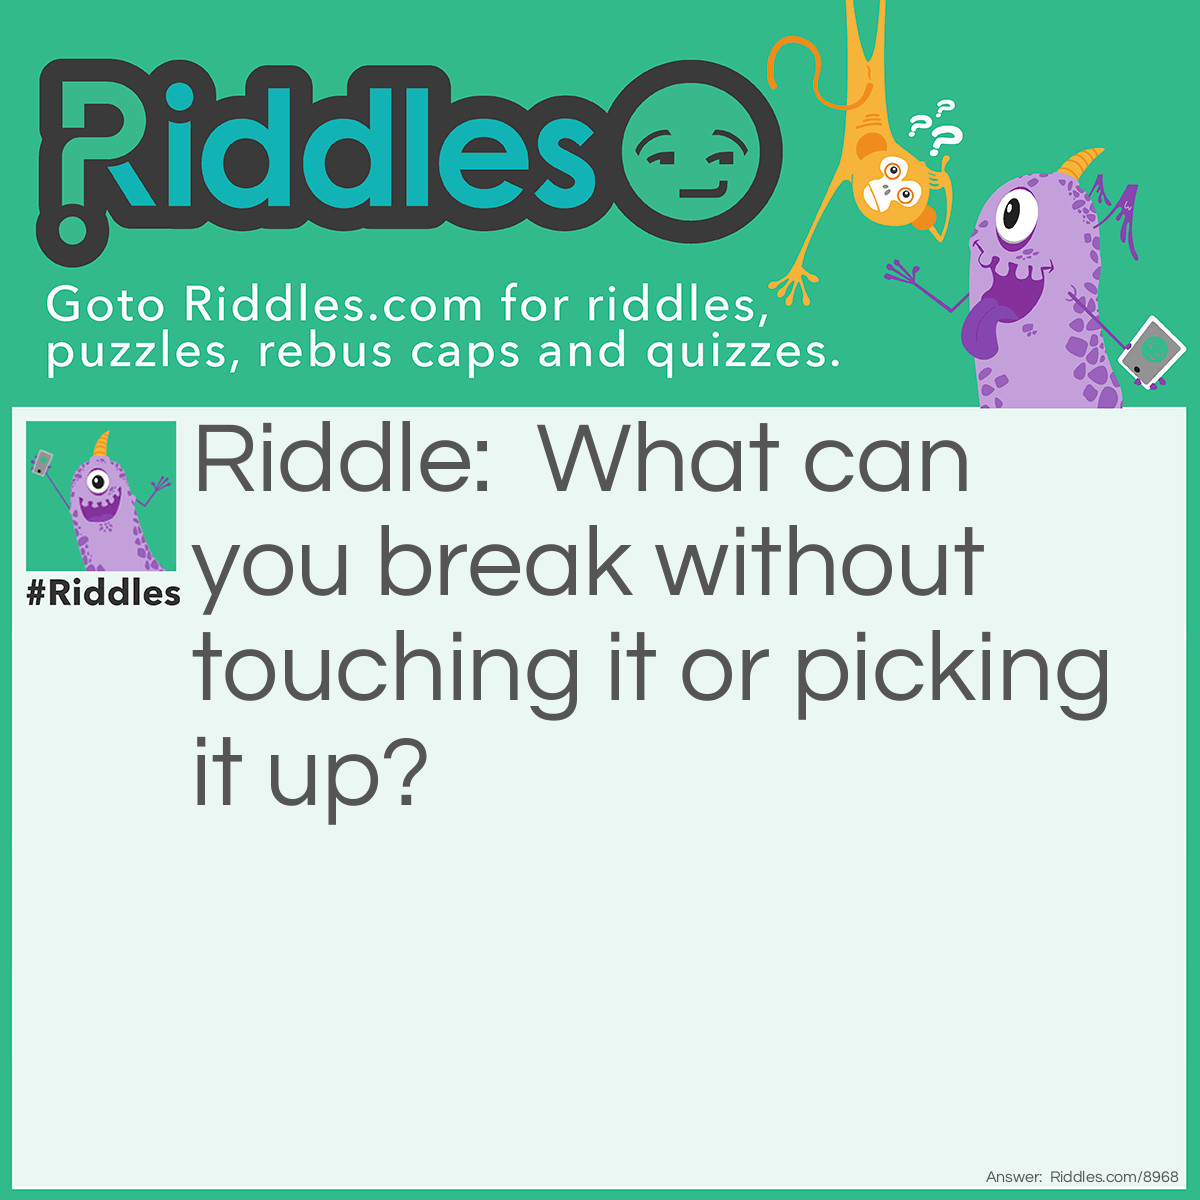 Riddle: What can you break without touching it or picking it up? Answer: A promise. You cannot touch it or pick it up to break it.